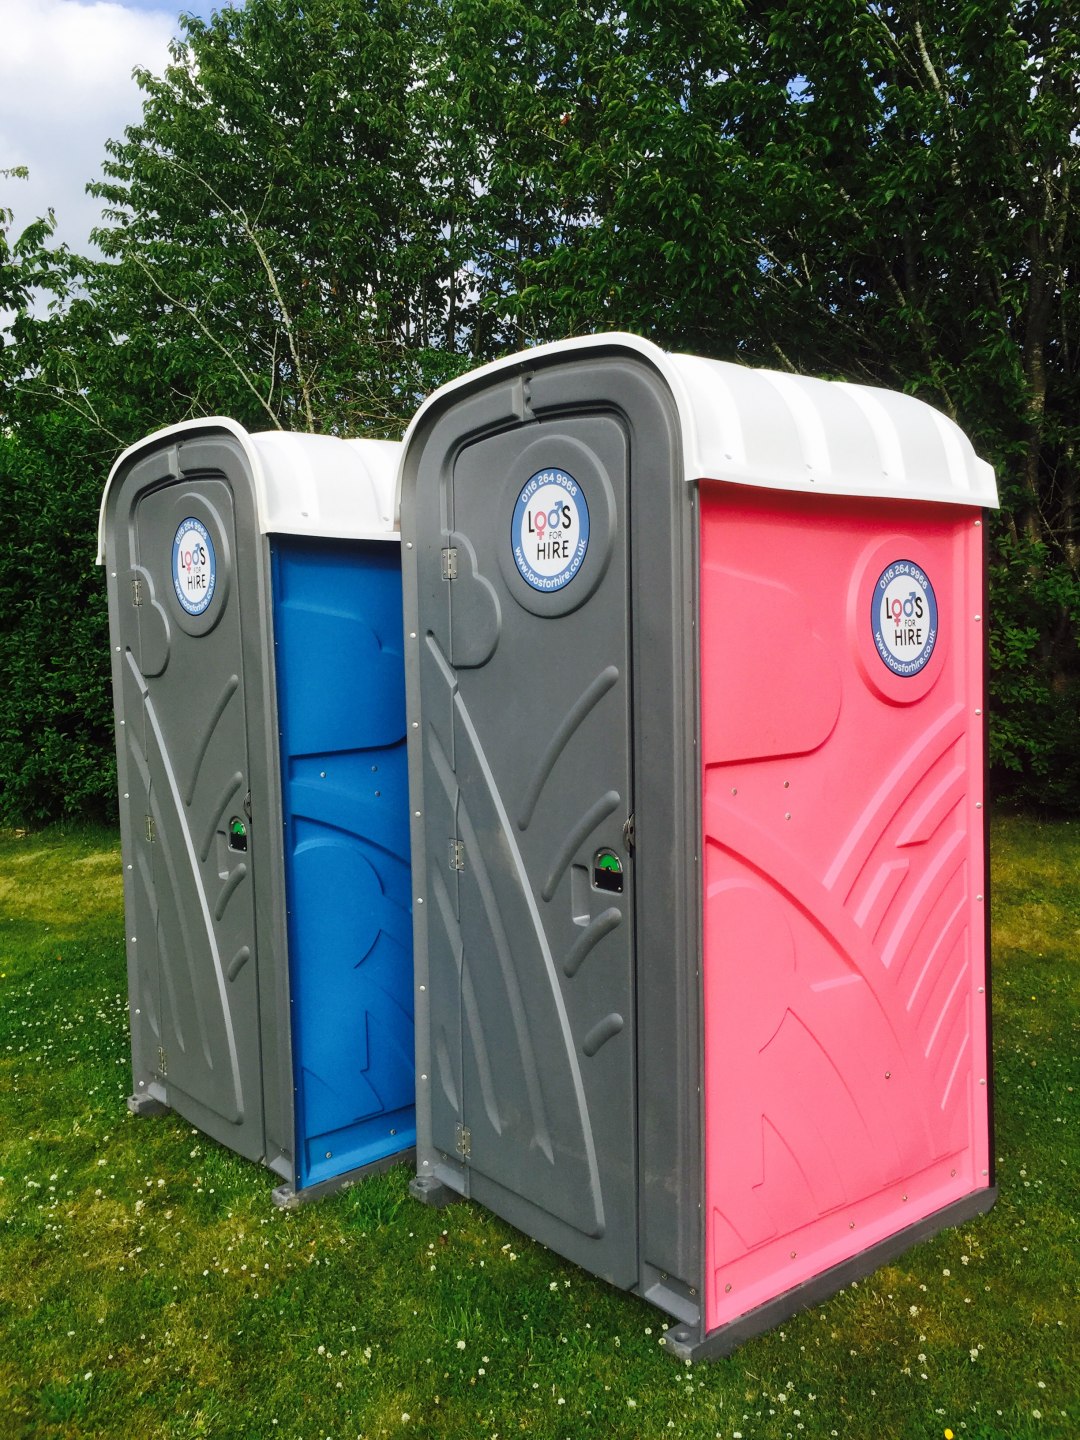 Loos for Hire provide portable toilet hire and luxury toilet hire in Leicestershire, Northamptonshire and Warwickshire.